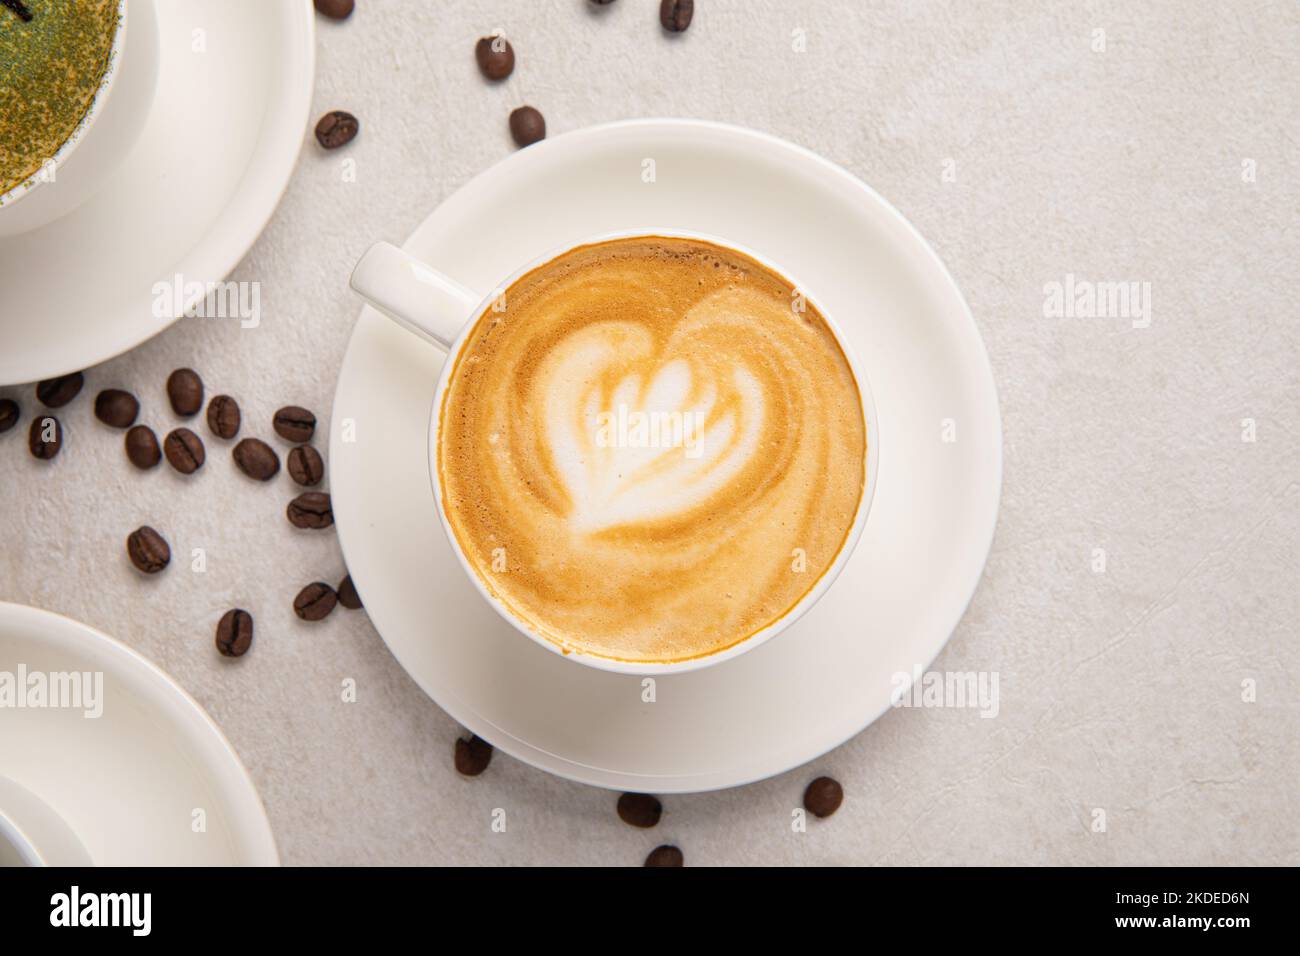 Cup of cappuccino coffee on the white table Stock Photo